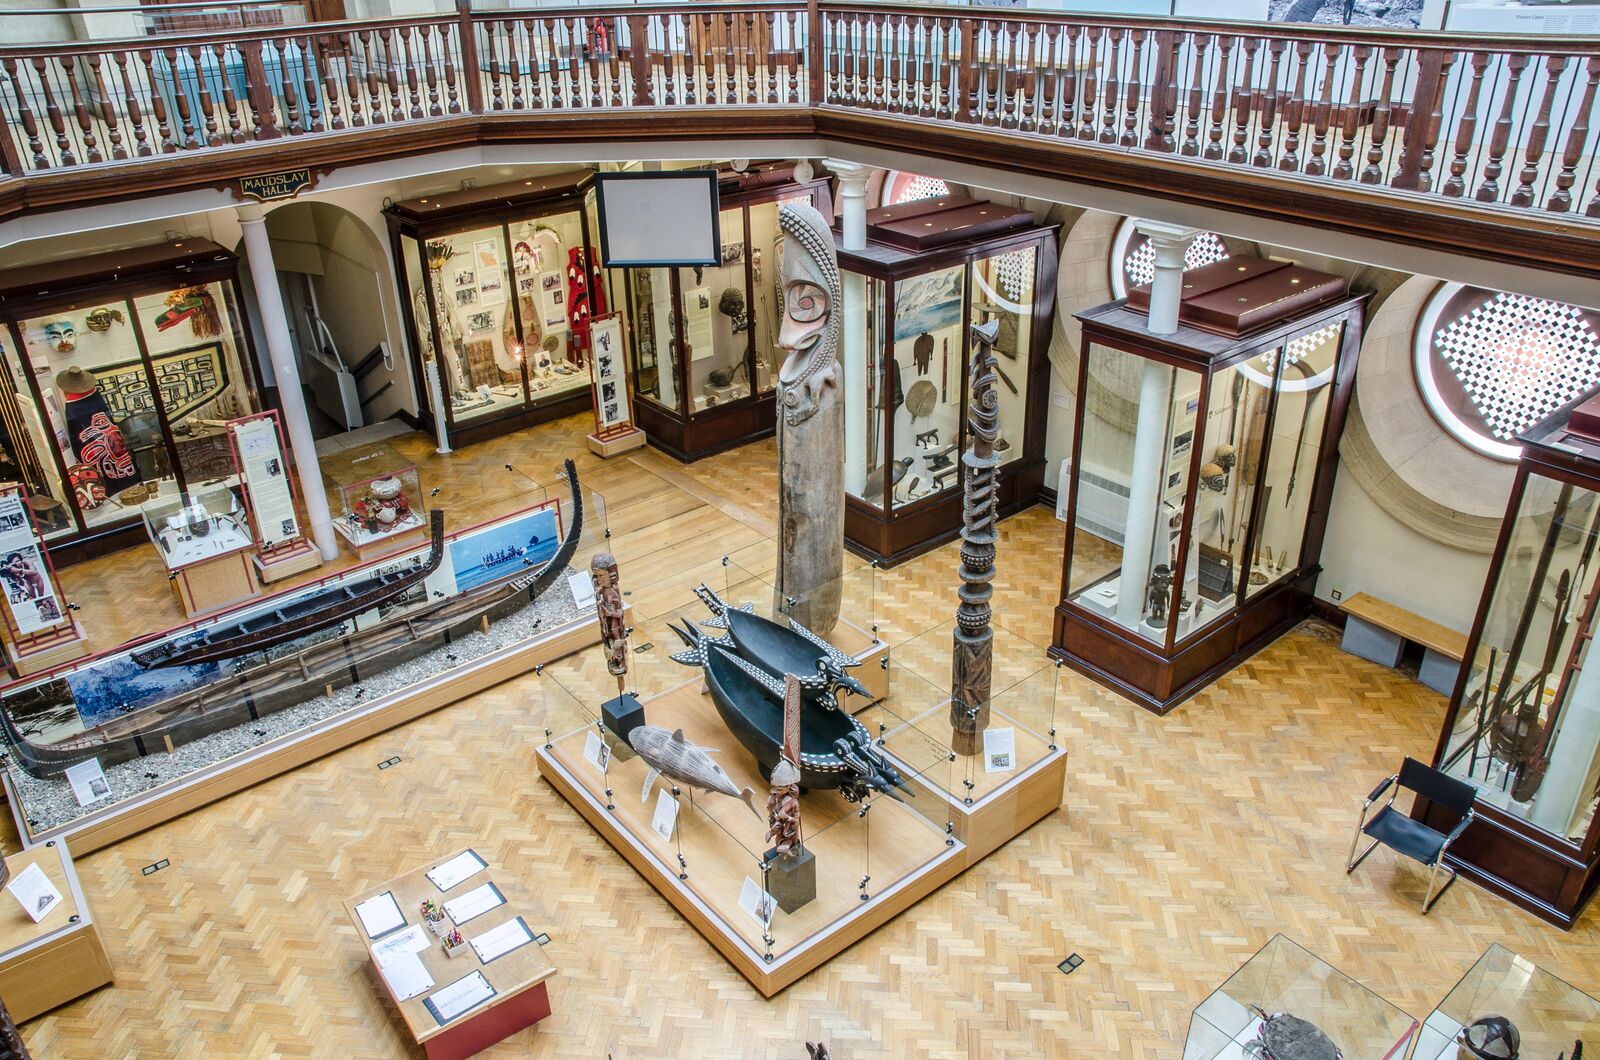 A view of the Maudslay Gallery from above